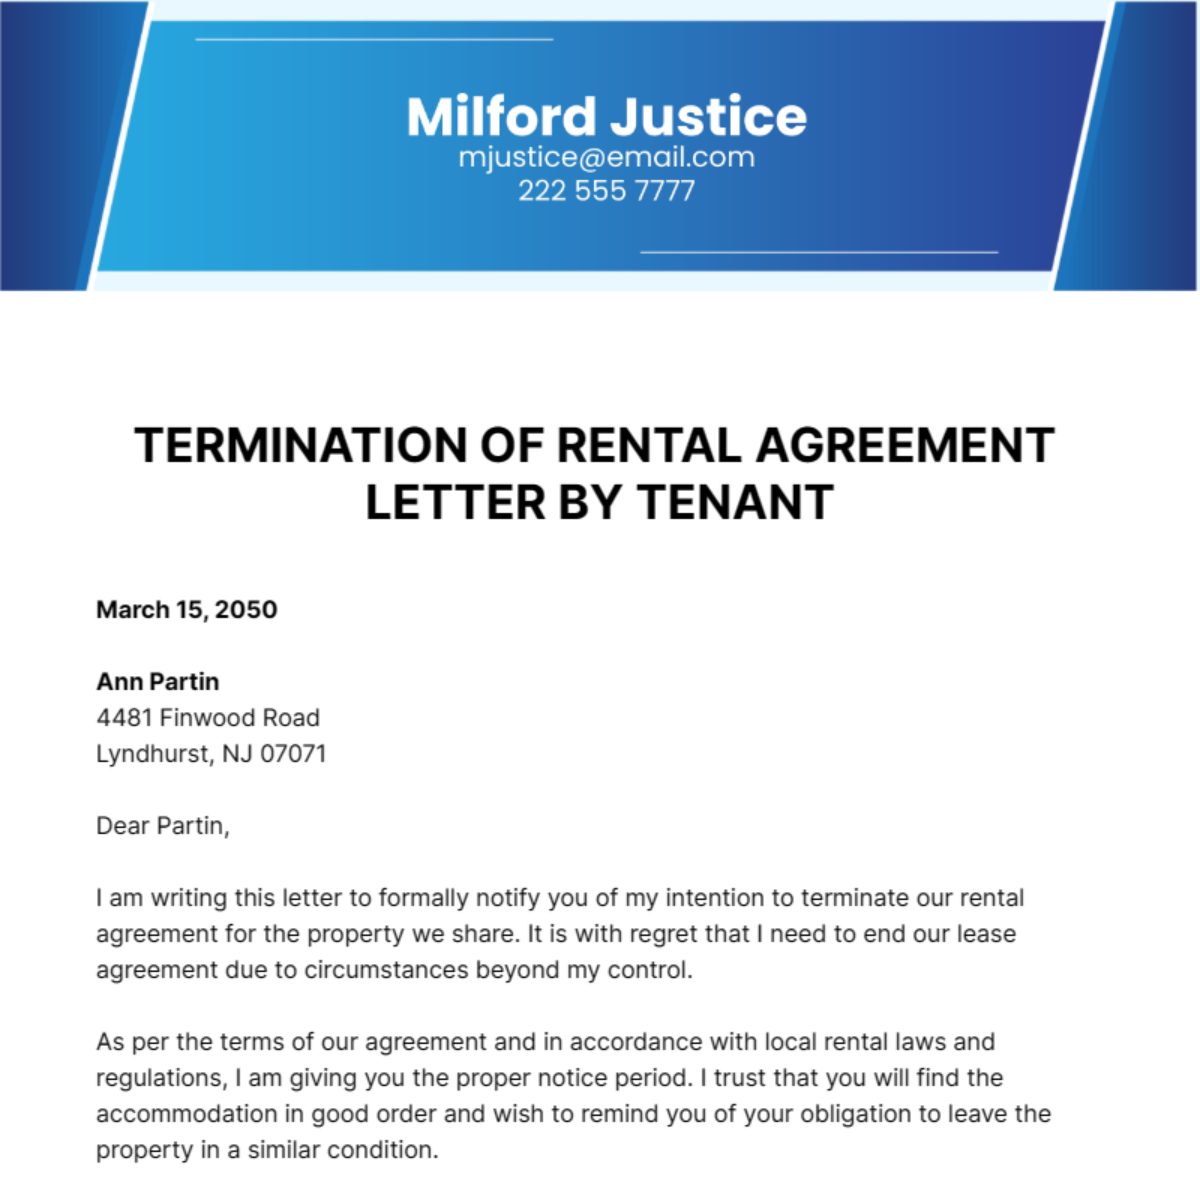 Termination of Rental Agreement Letter by Tenant  Template